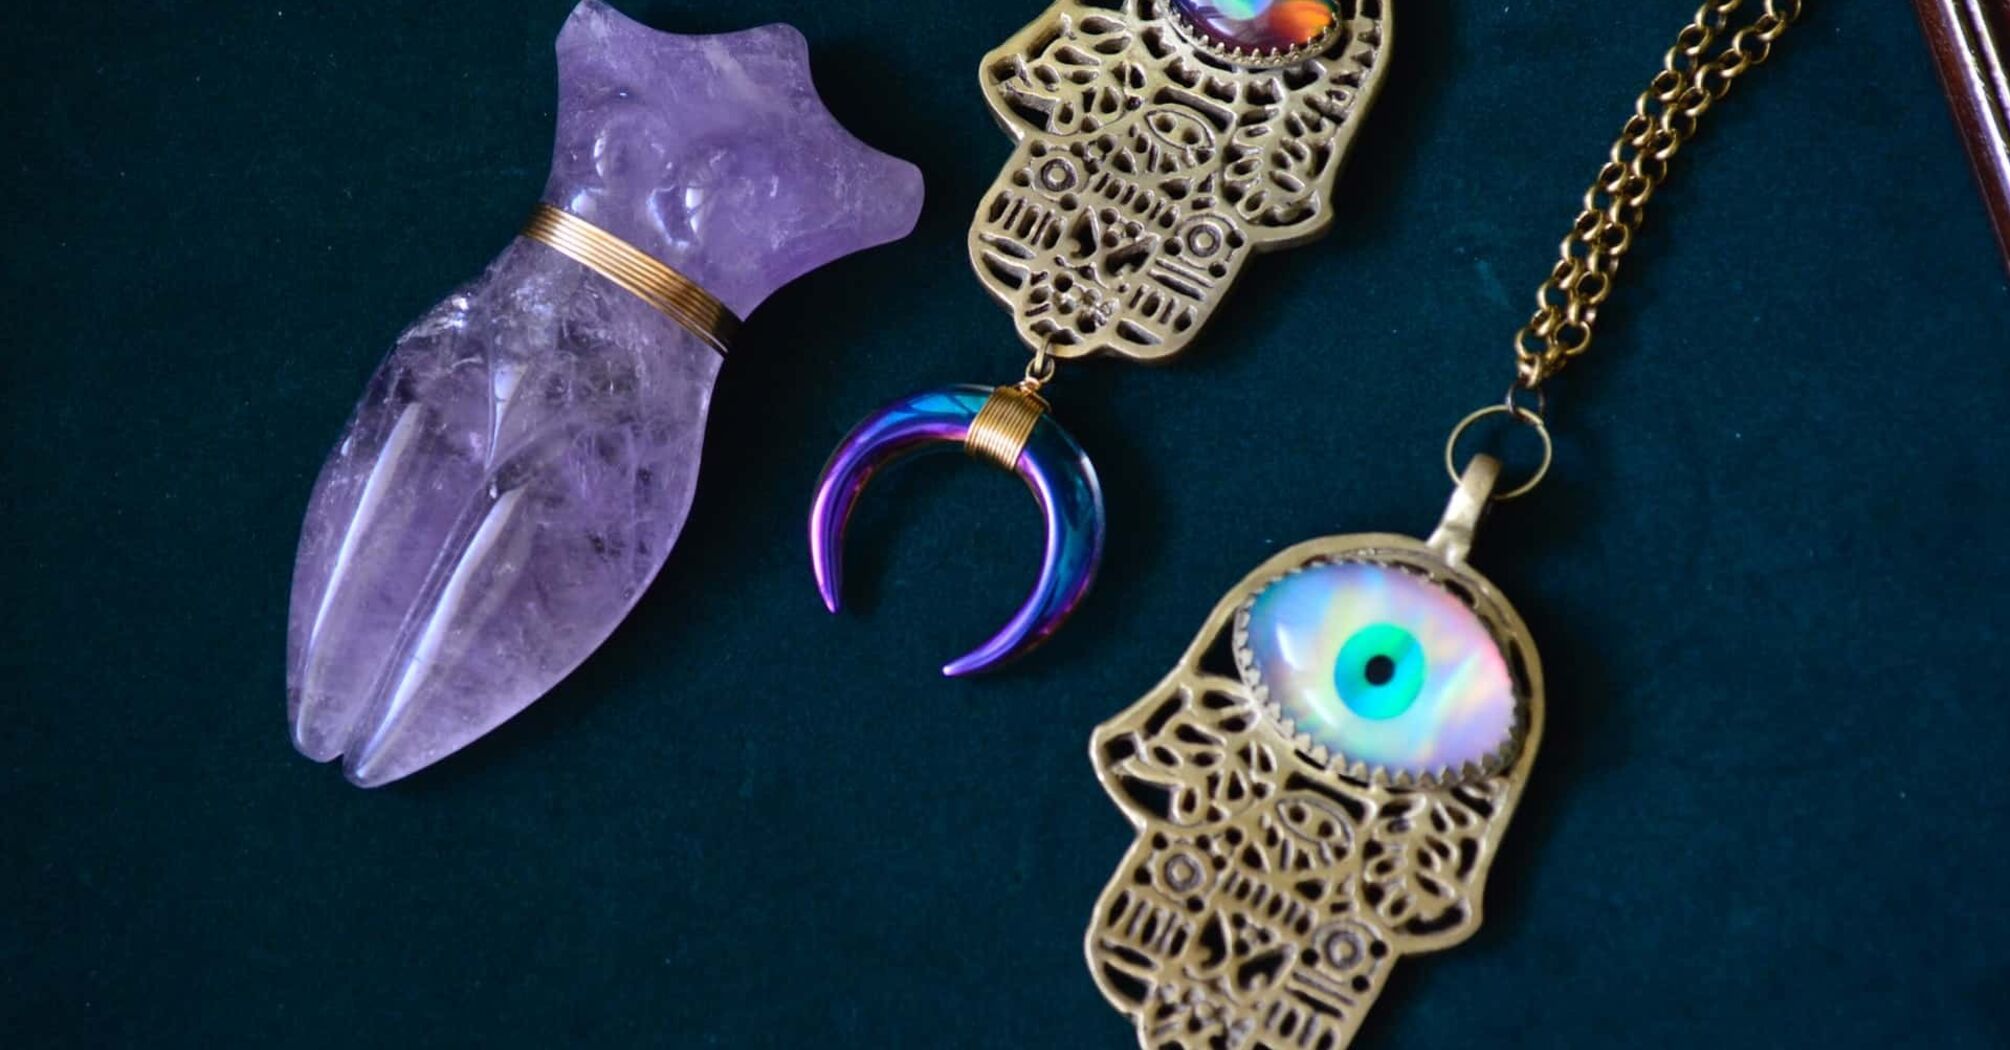 Is the amulet pin effective against the evil eye